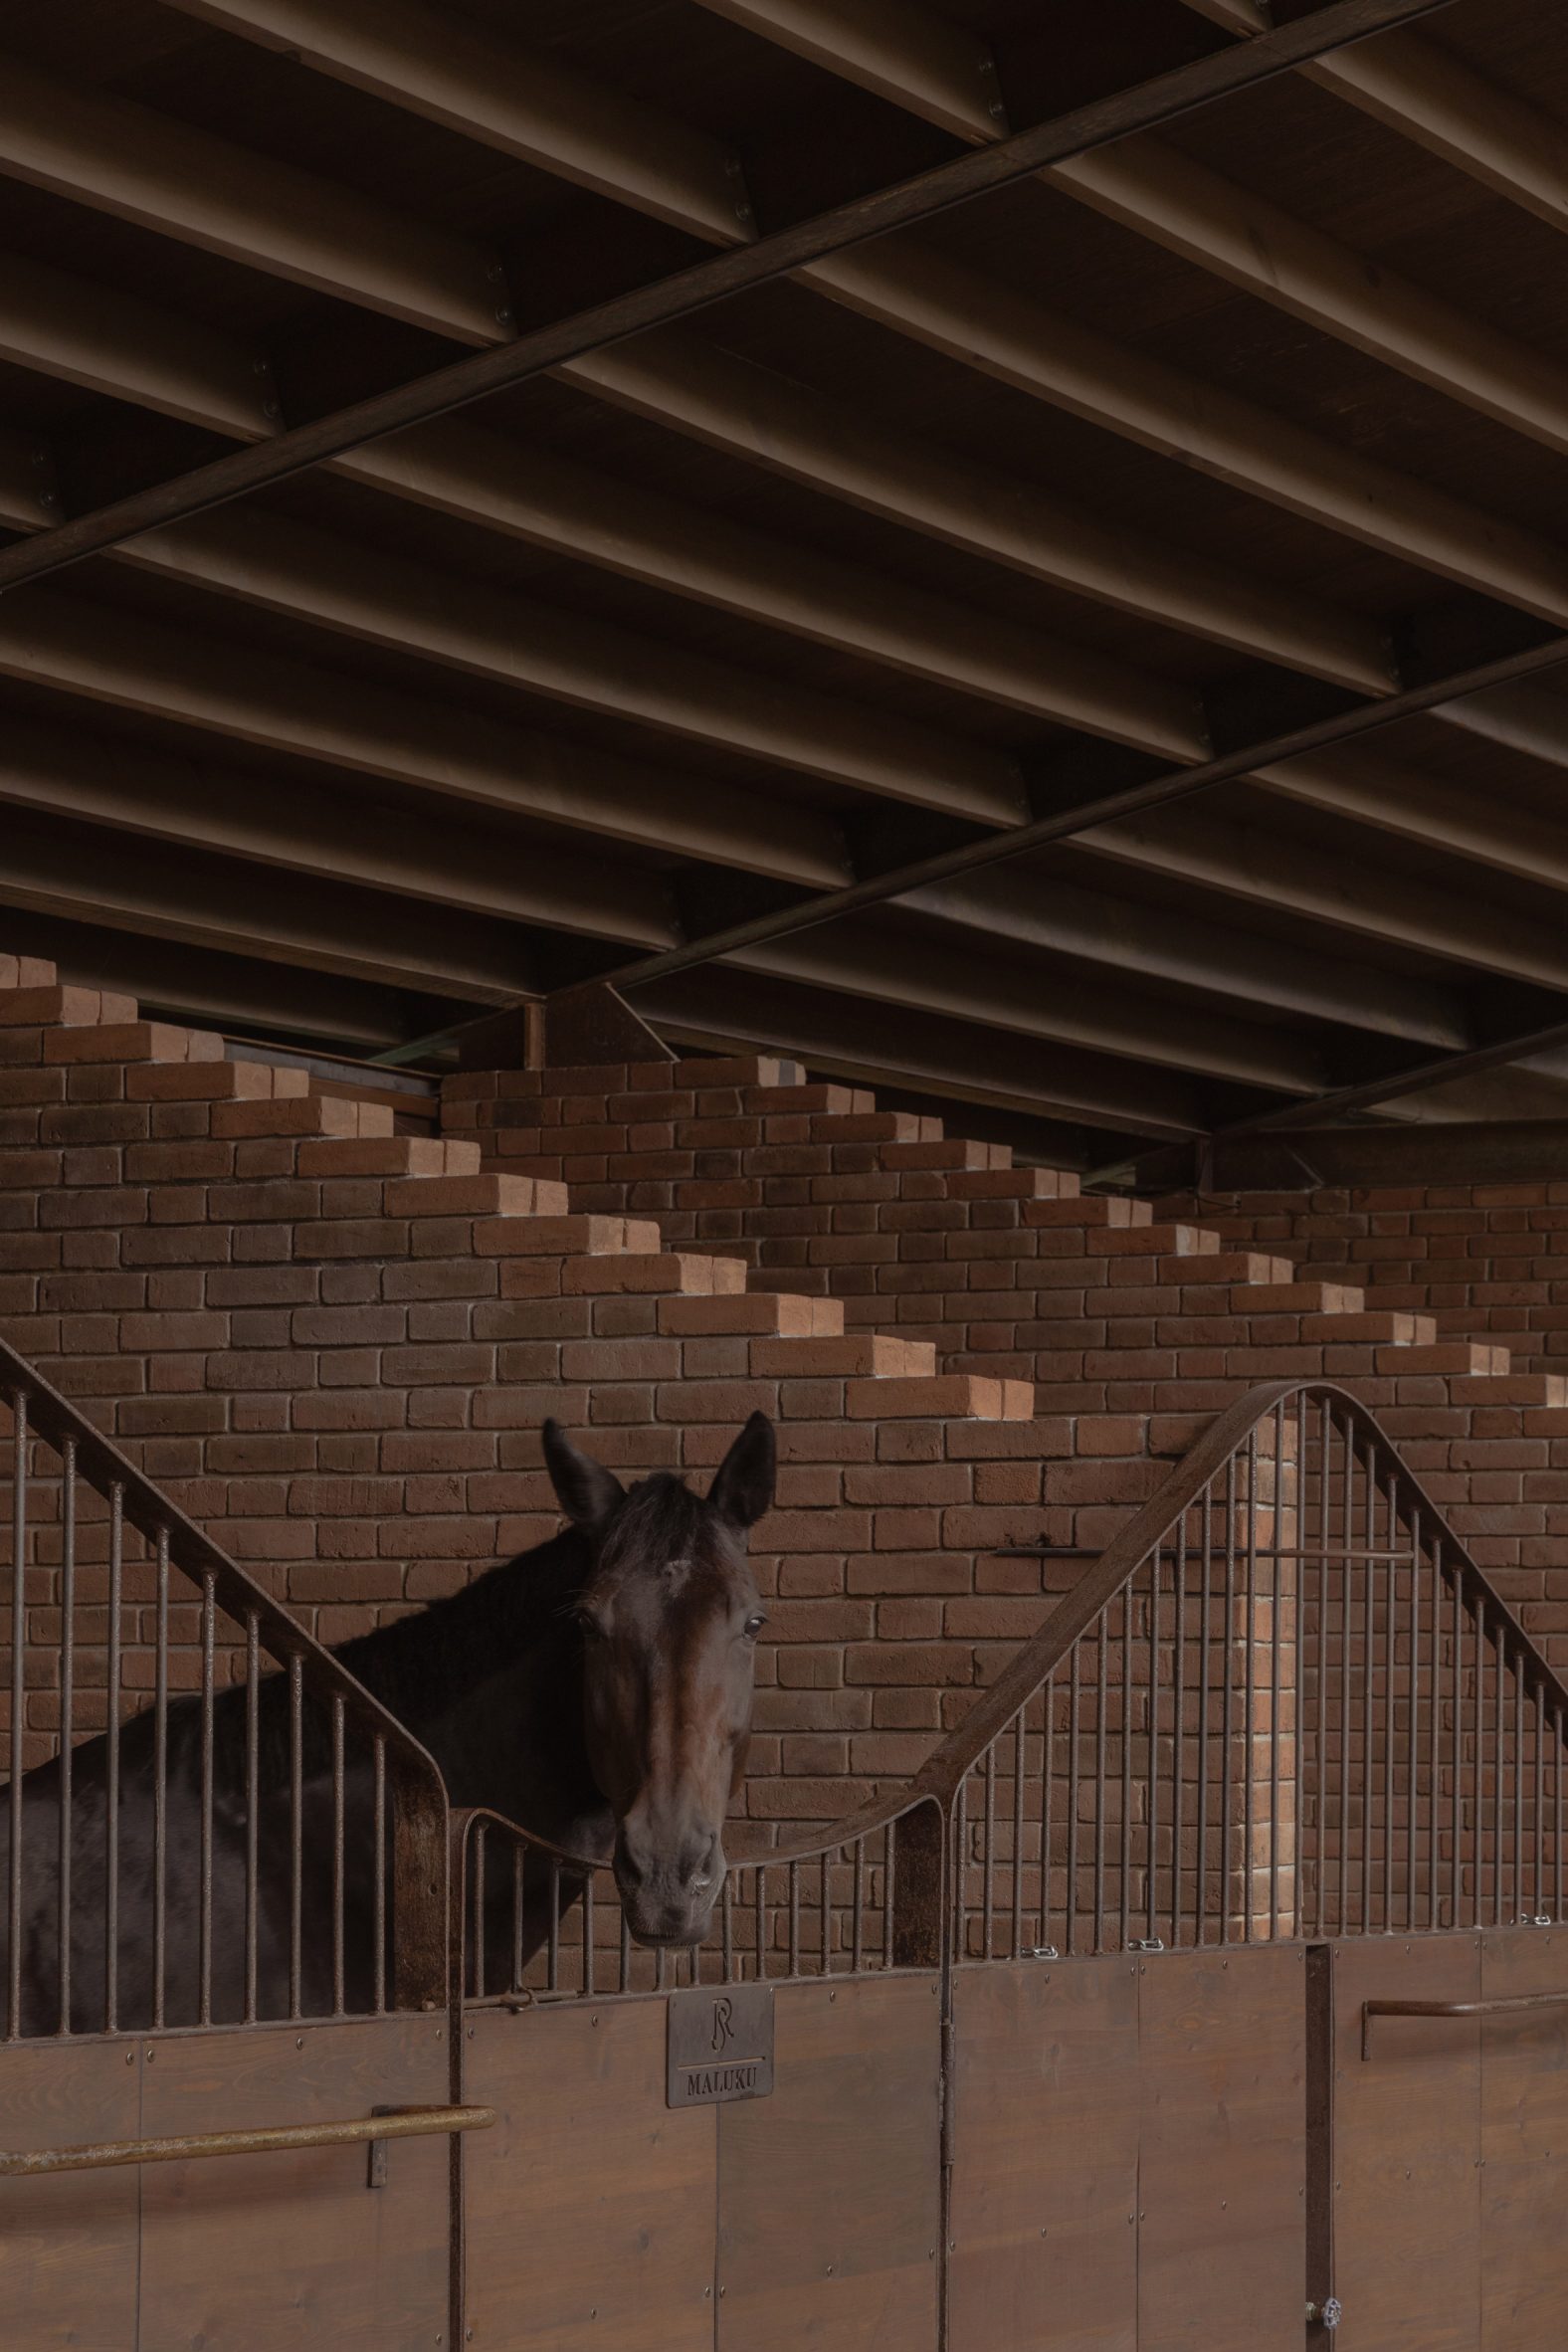 Horse pokes its head over a metal gate inside the stables